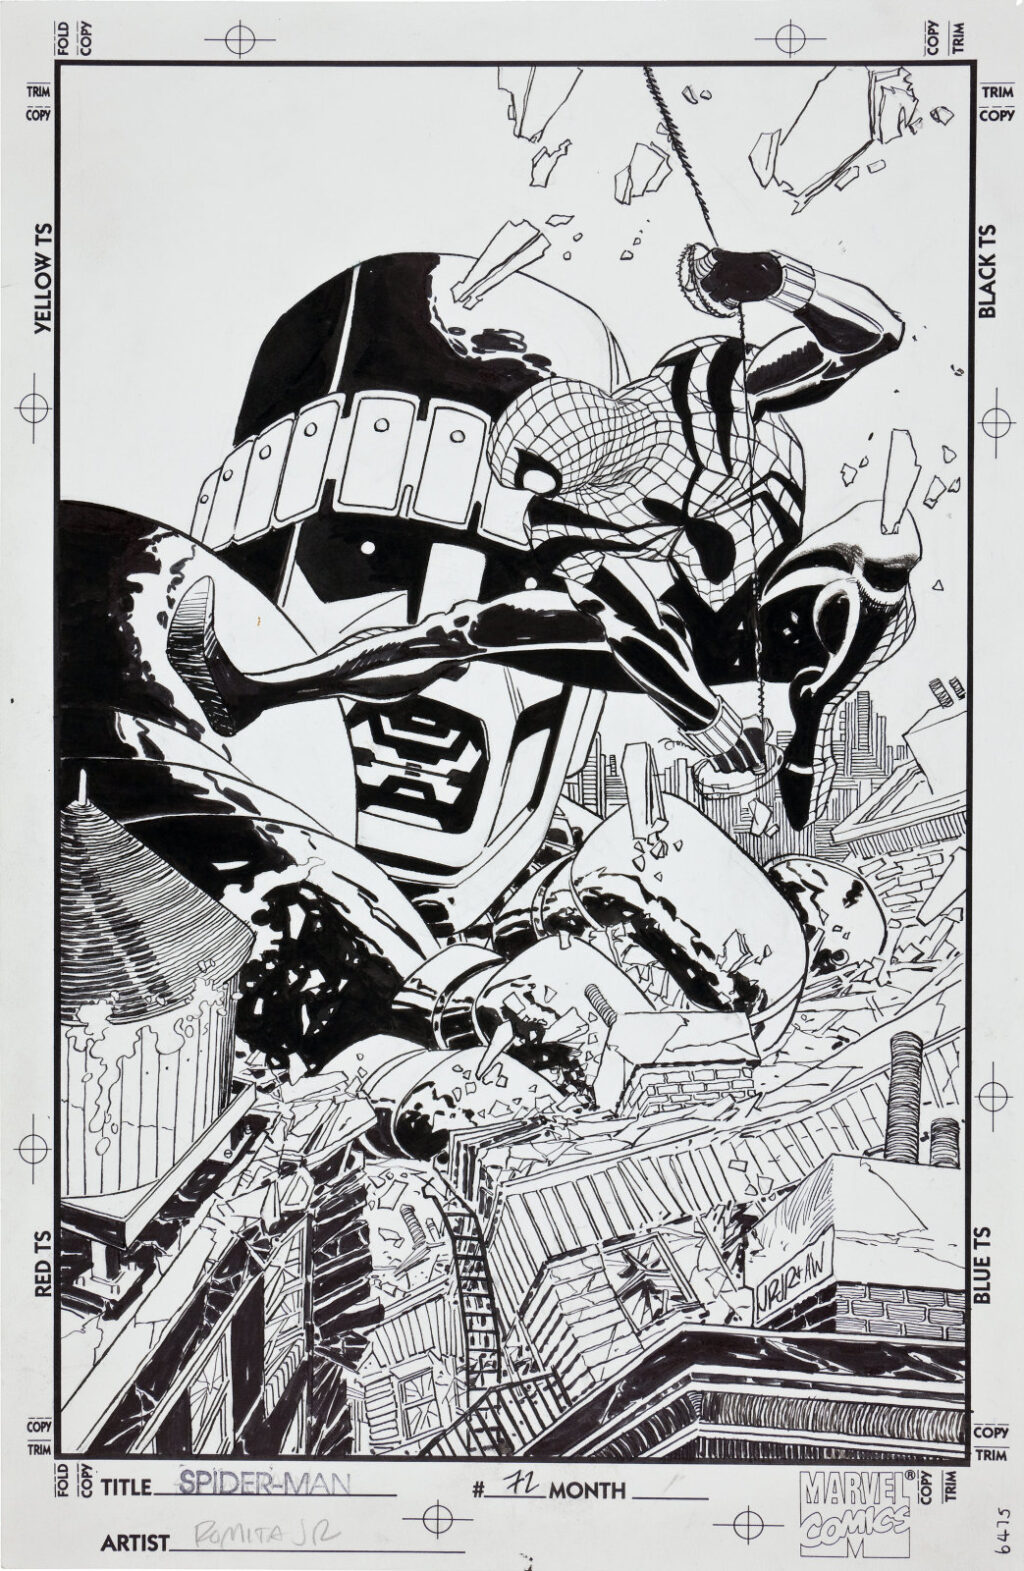 Spider Man issue 72 cover by John Romita Jr. and Al Williamson